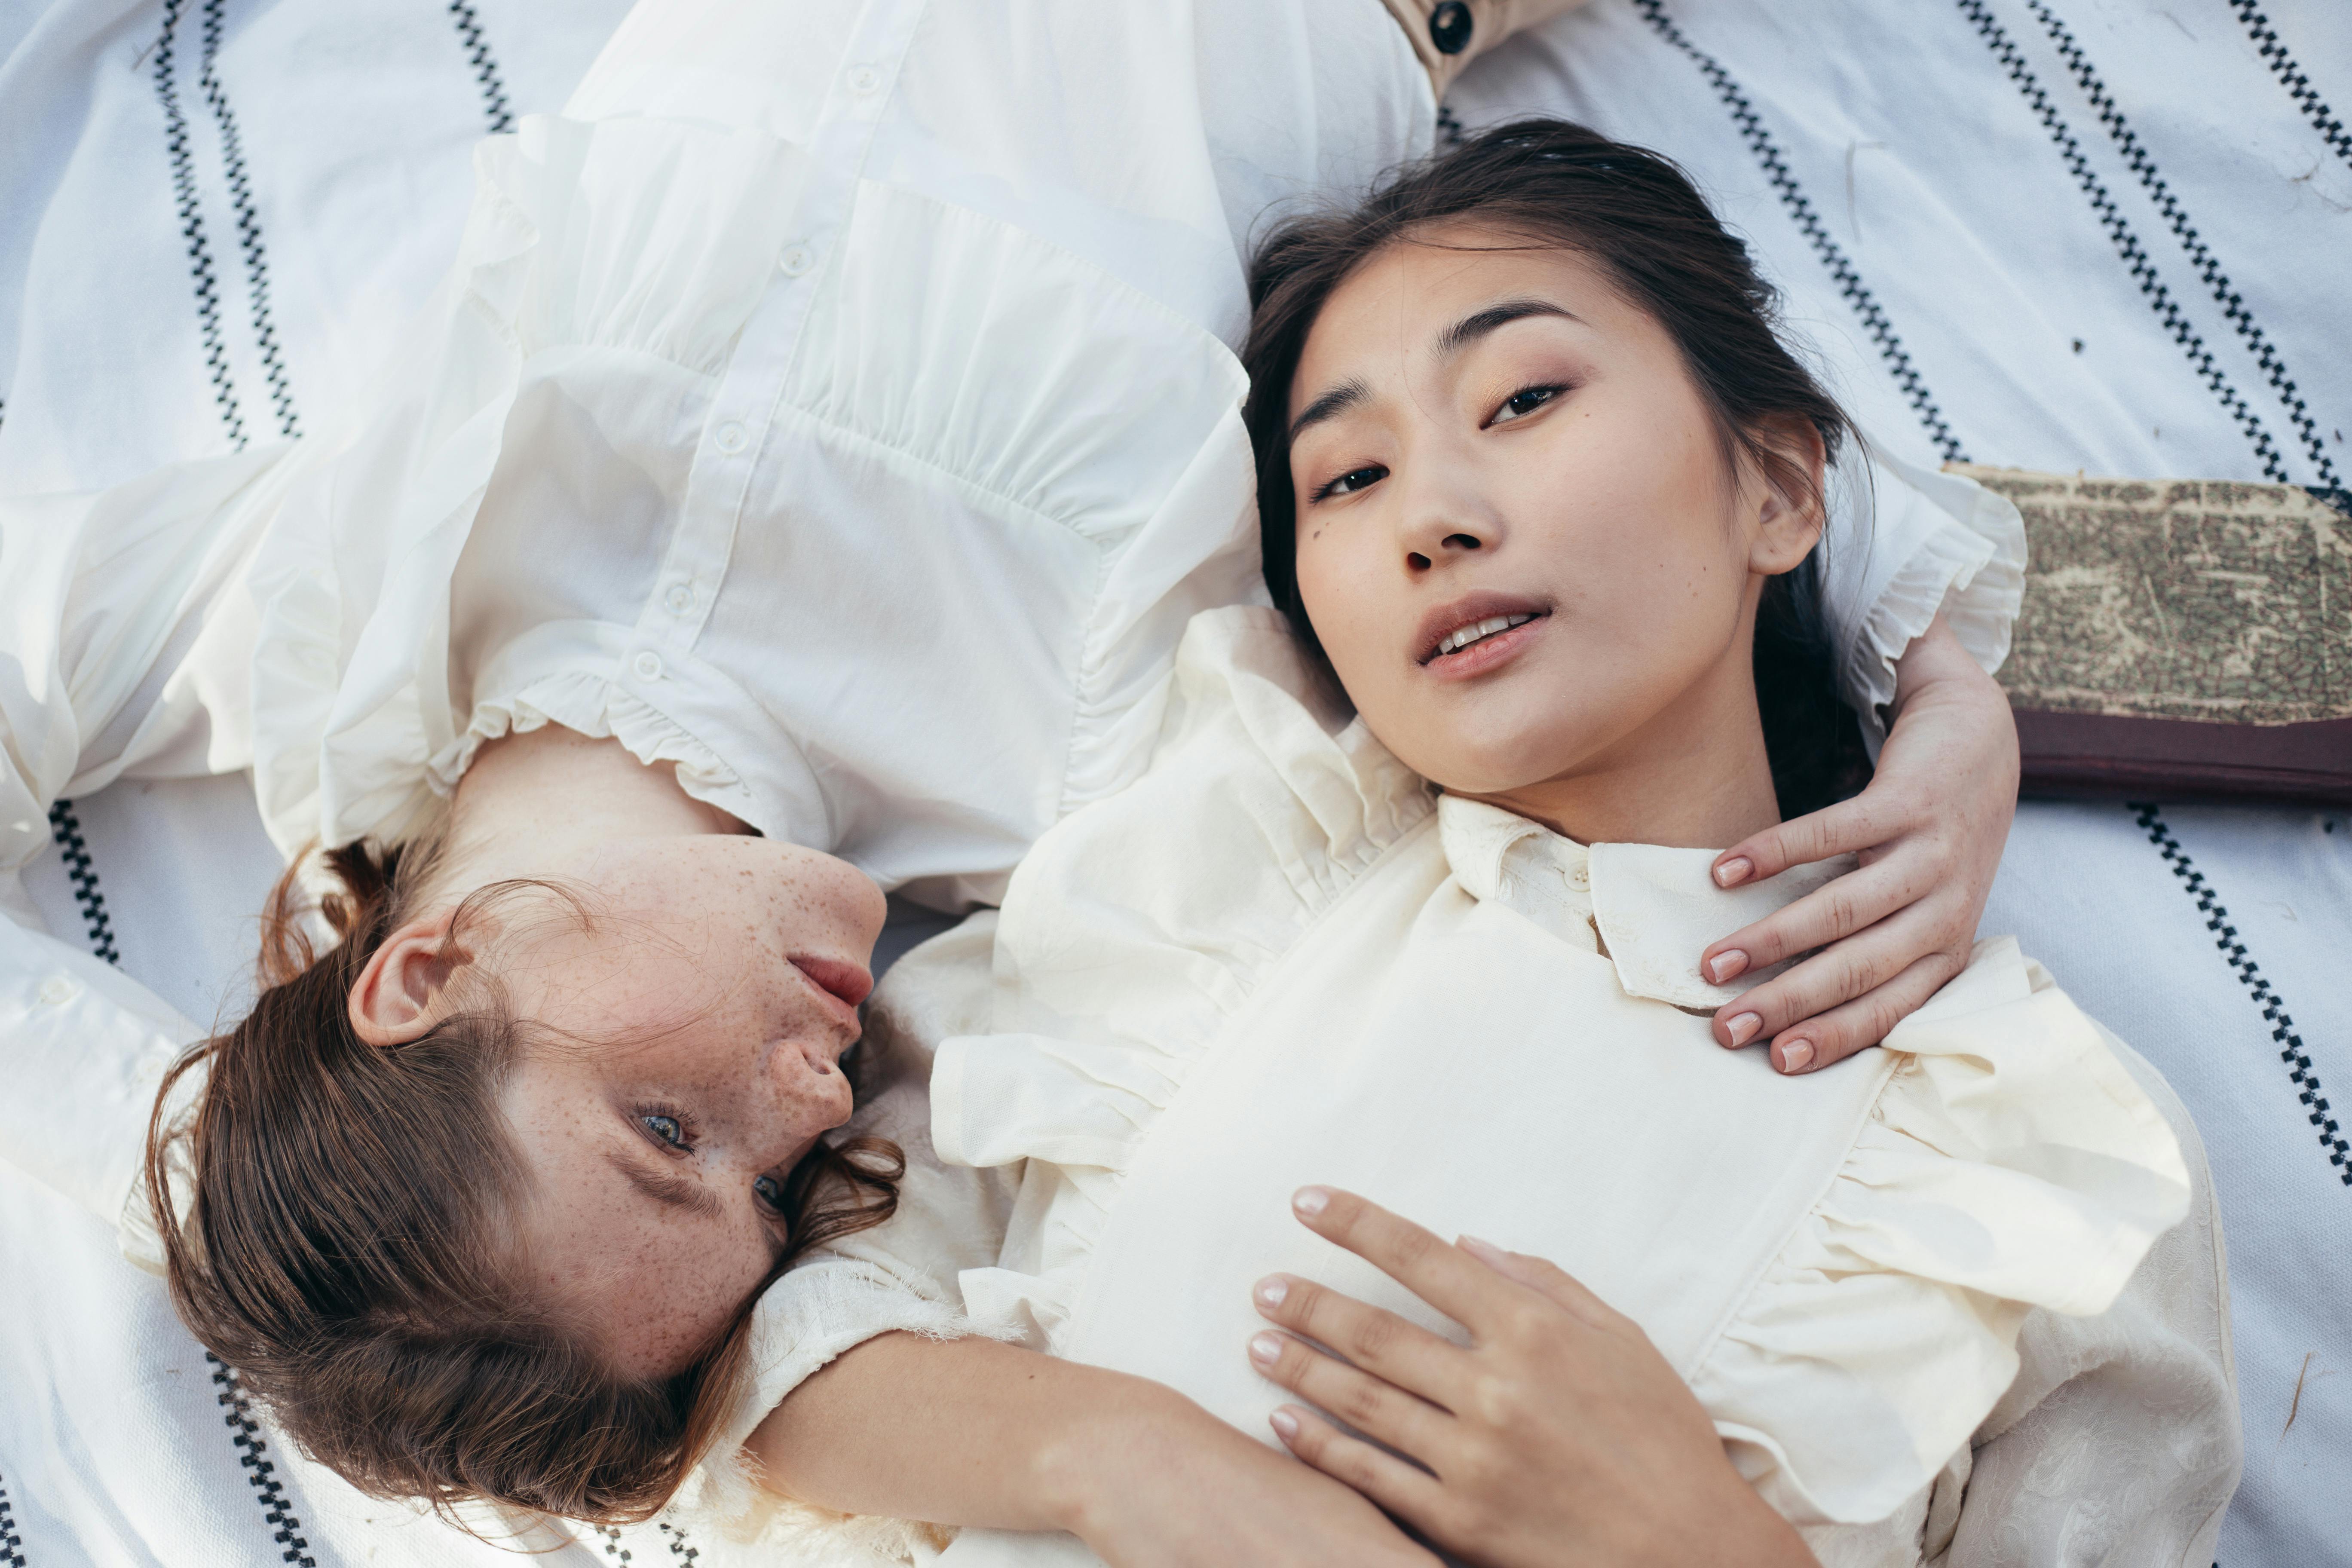 women in old fashioned clothing lying on picnic blanket